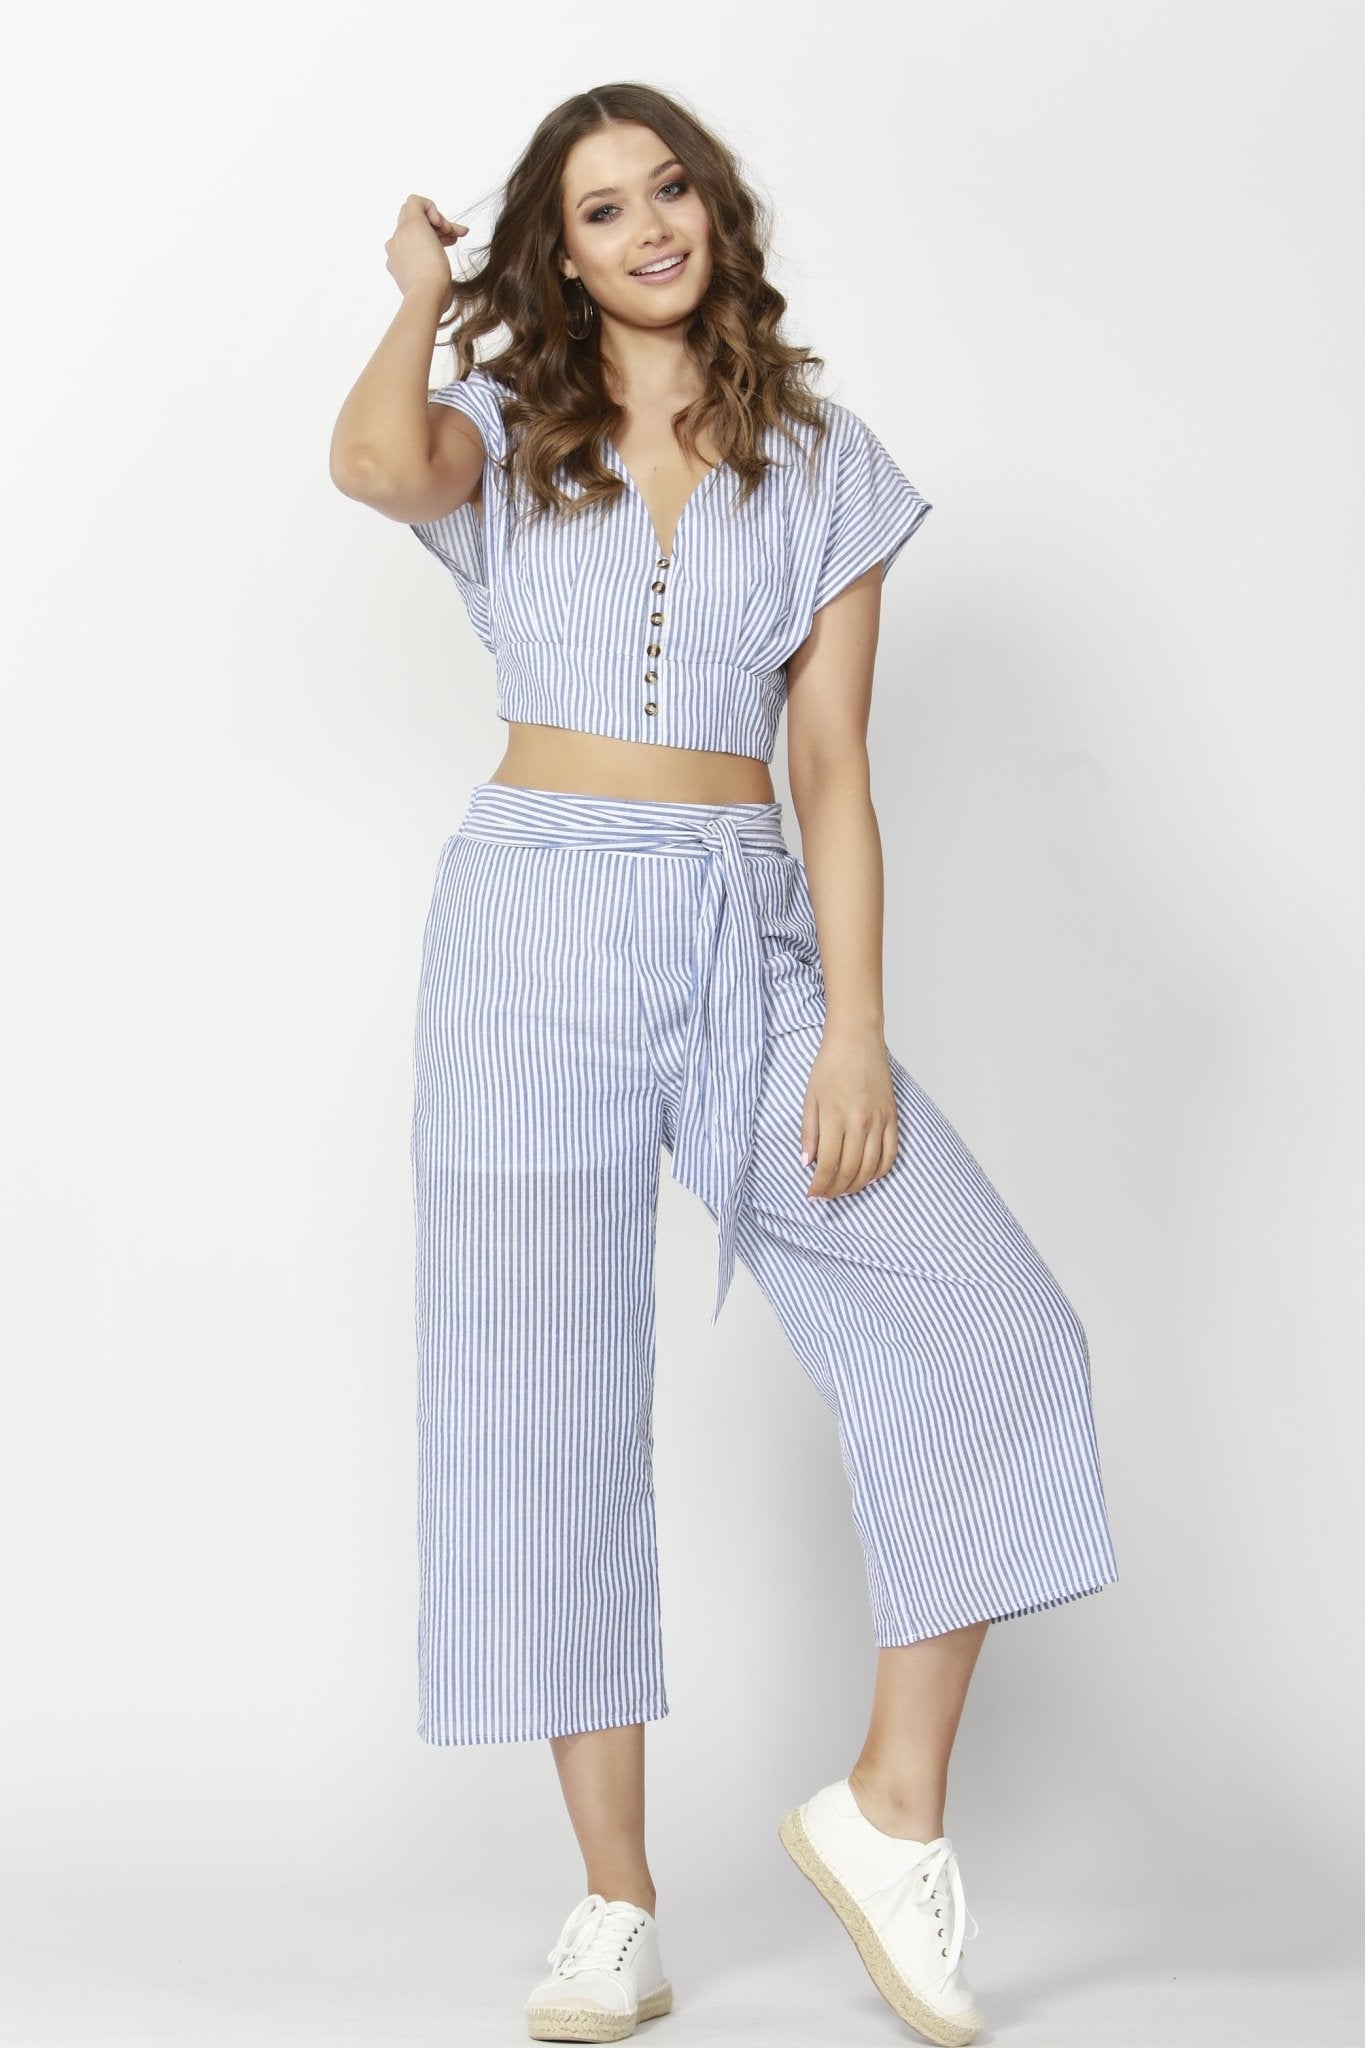 Sass Stripe Out Cropped Top in Blue White Stripe - Hey Sara